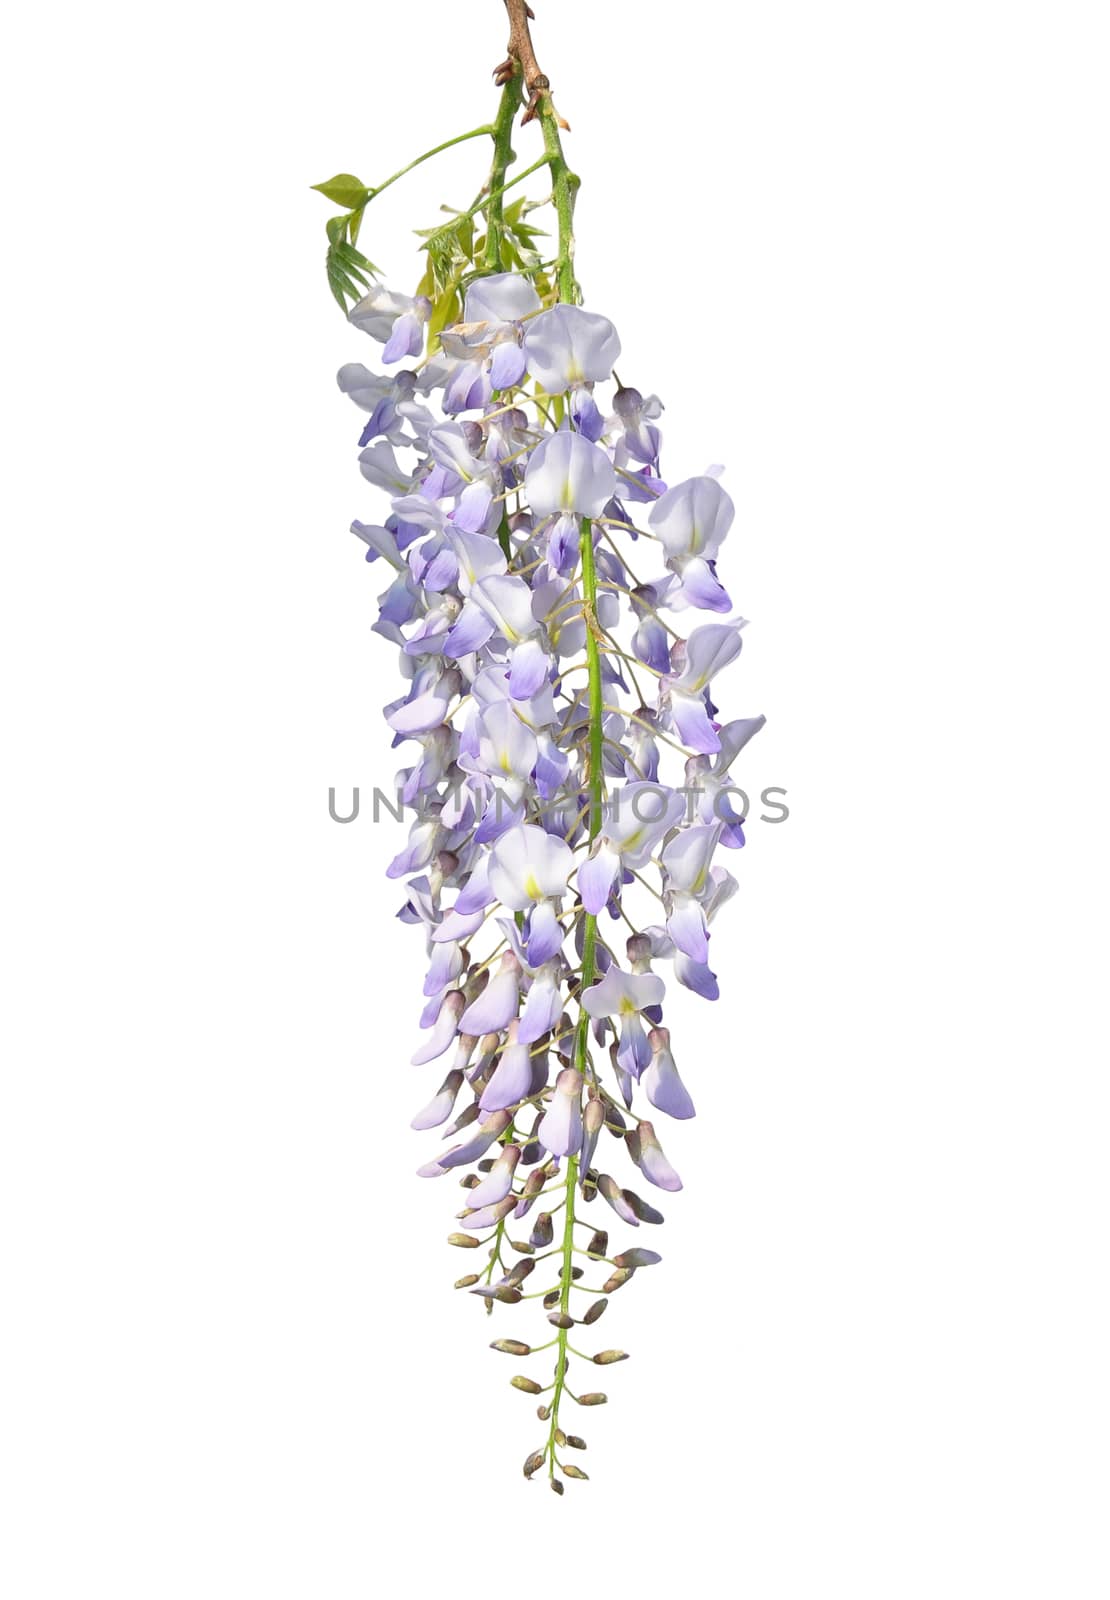 Chinese wisteria (Wisteria sinensis) by rbiedermann